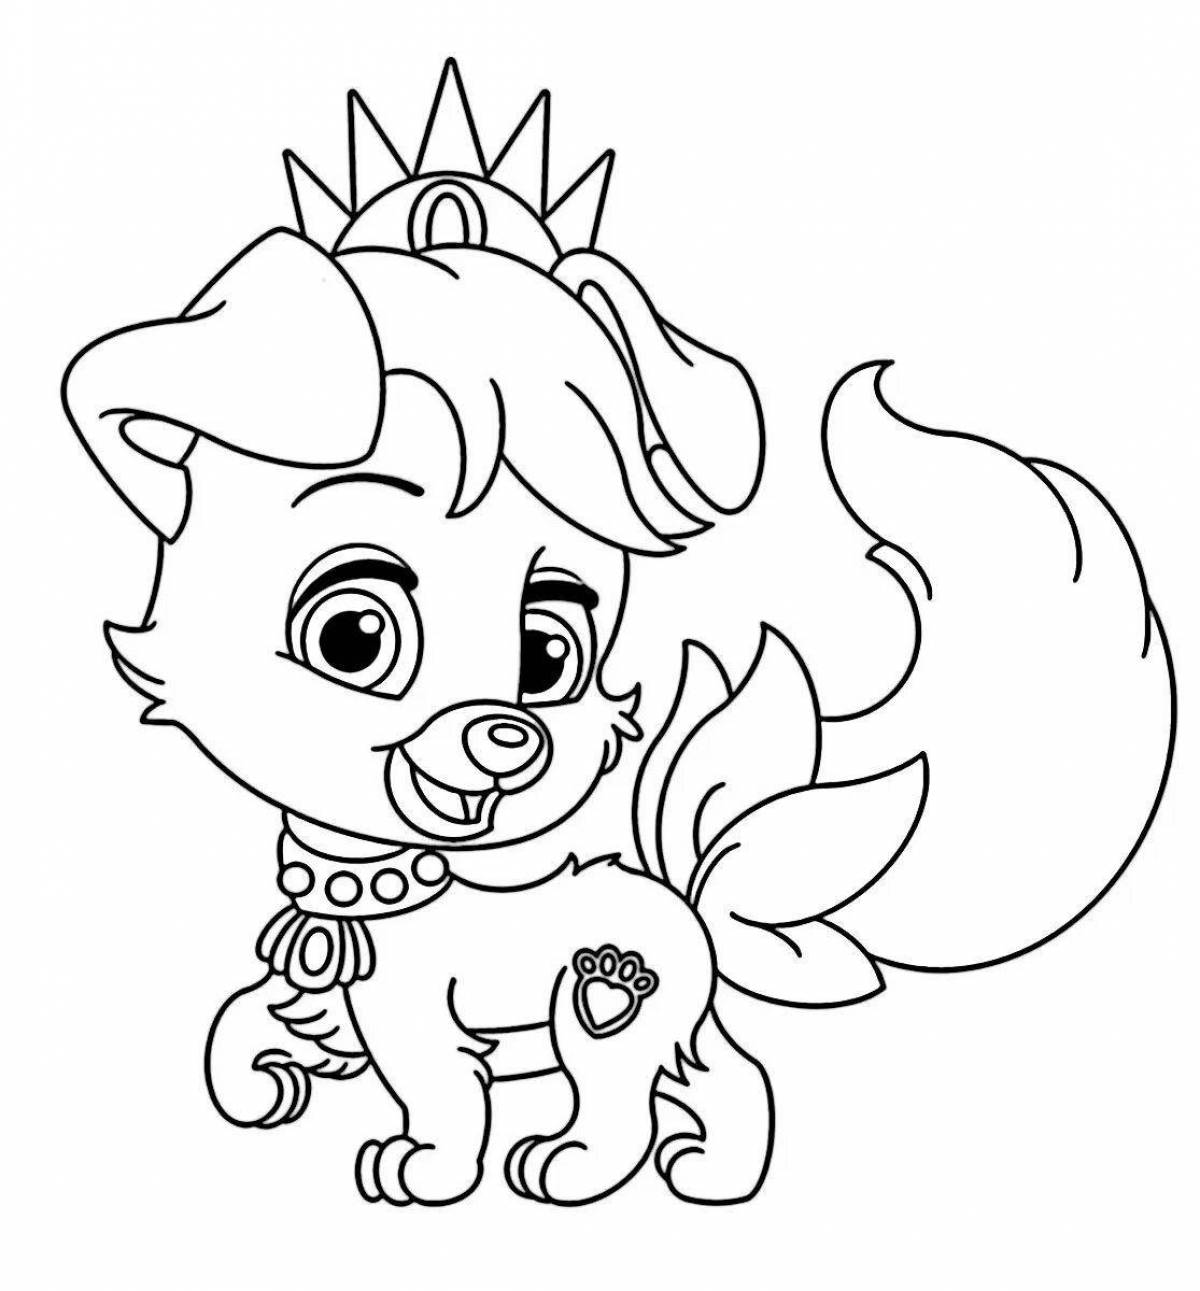 Live coloring princess with a dog